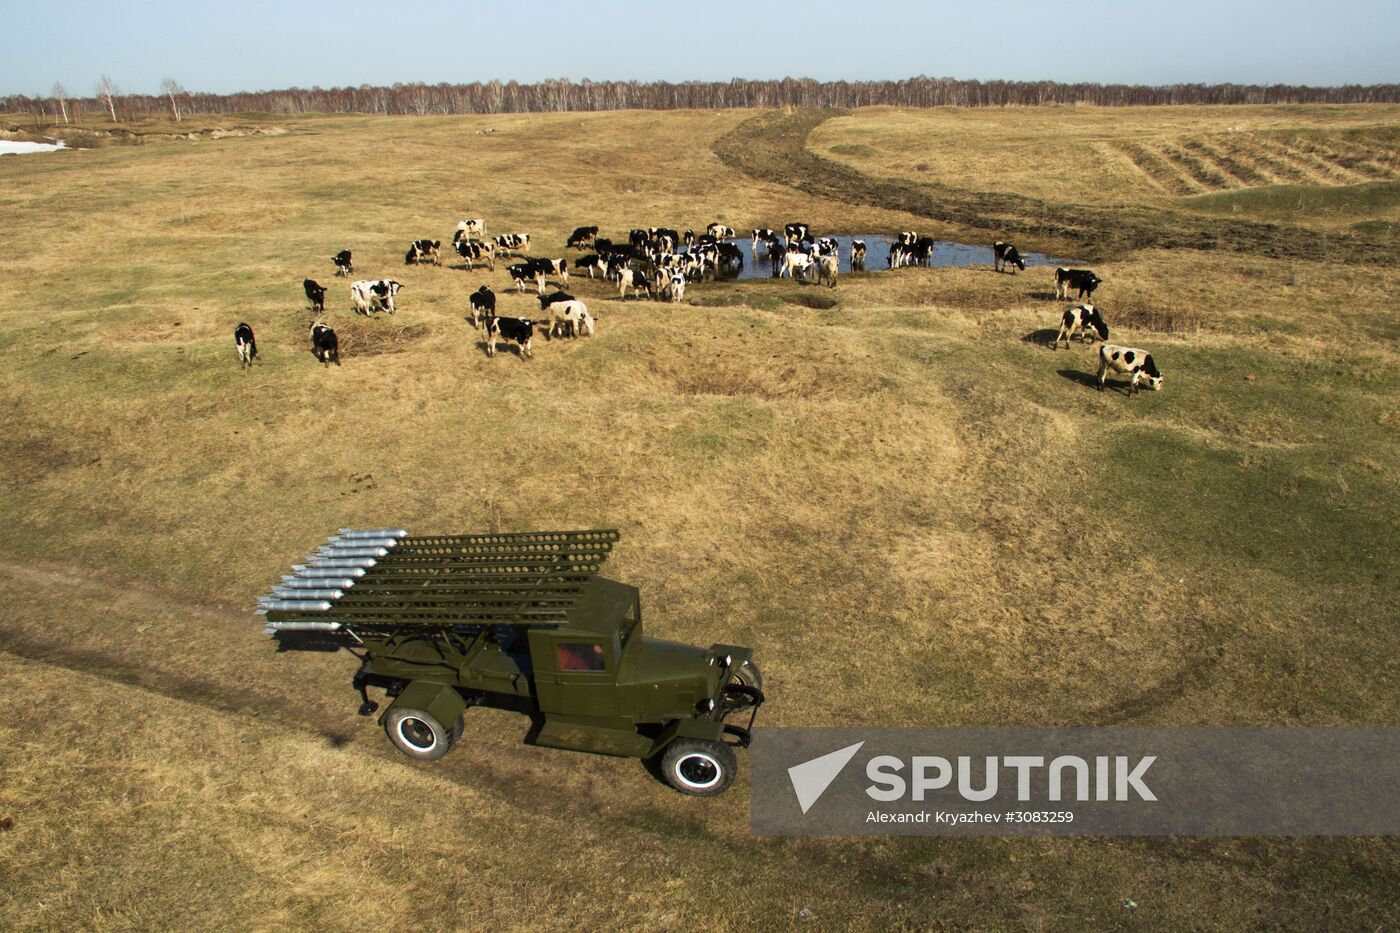 Manufacturing full-size models of WWII military vehicles in Novosibirsk Region